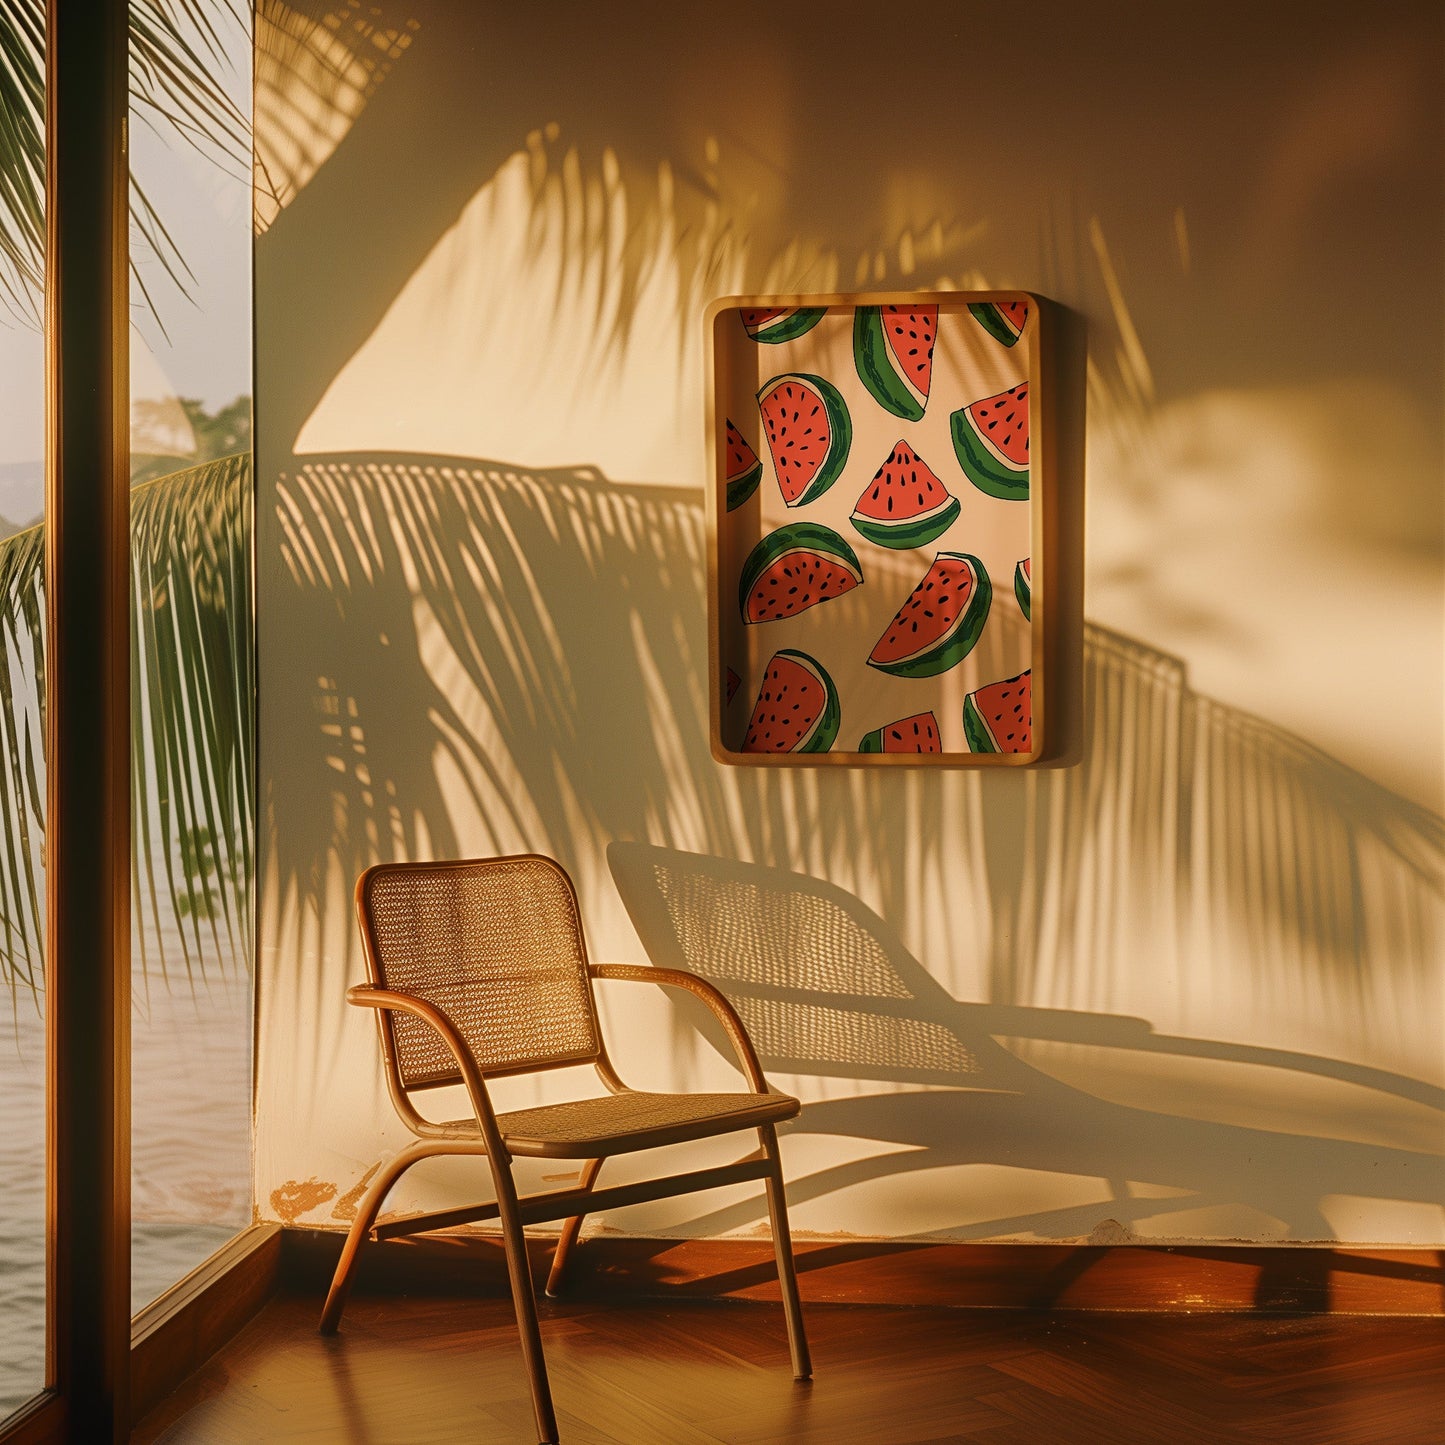 A cozy chair by a sunlit window with palm tree shadows and watermelon art on the wall.